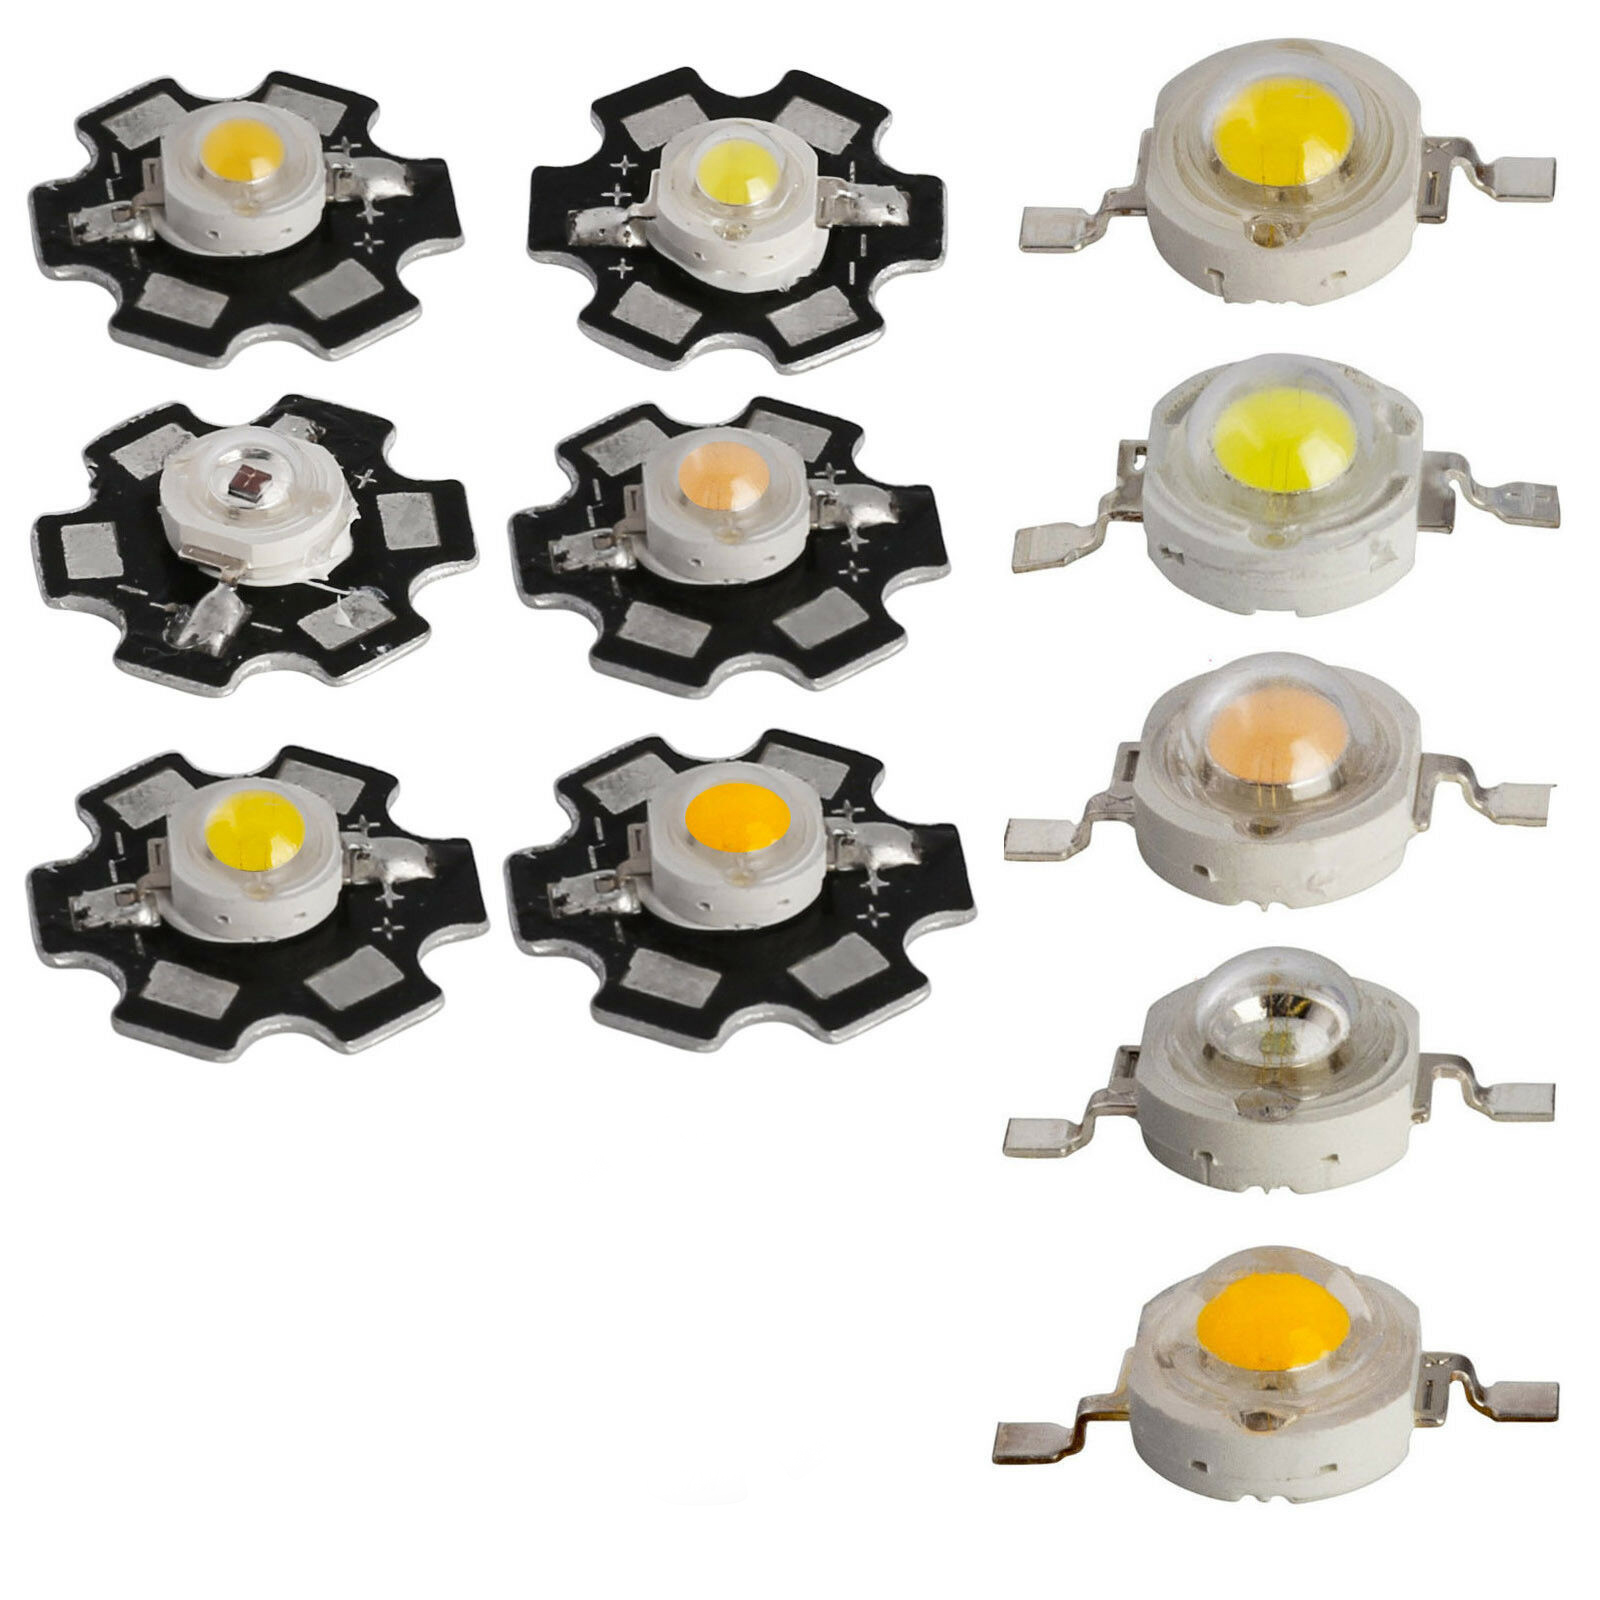 Star Bases Plate and 5 High Power LED SMD Chip Lamp Bead Bulb Aluminium PCB 